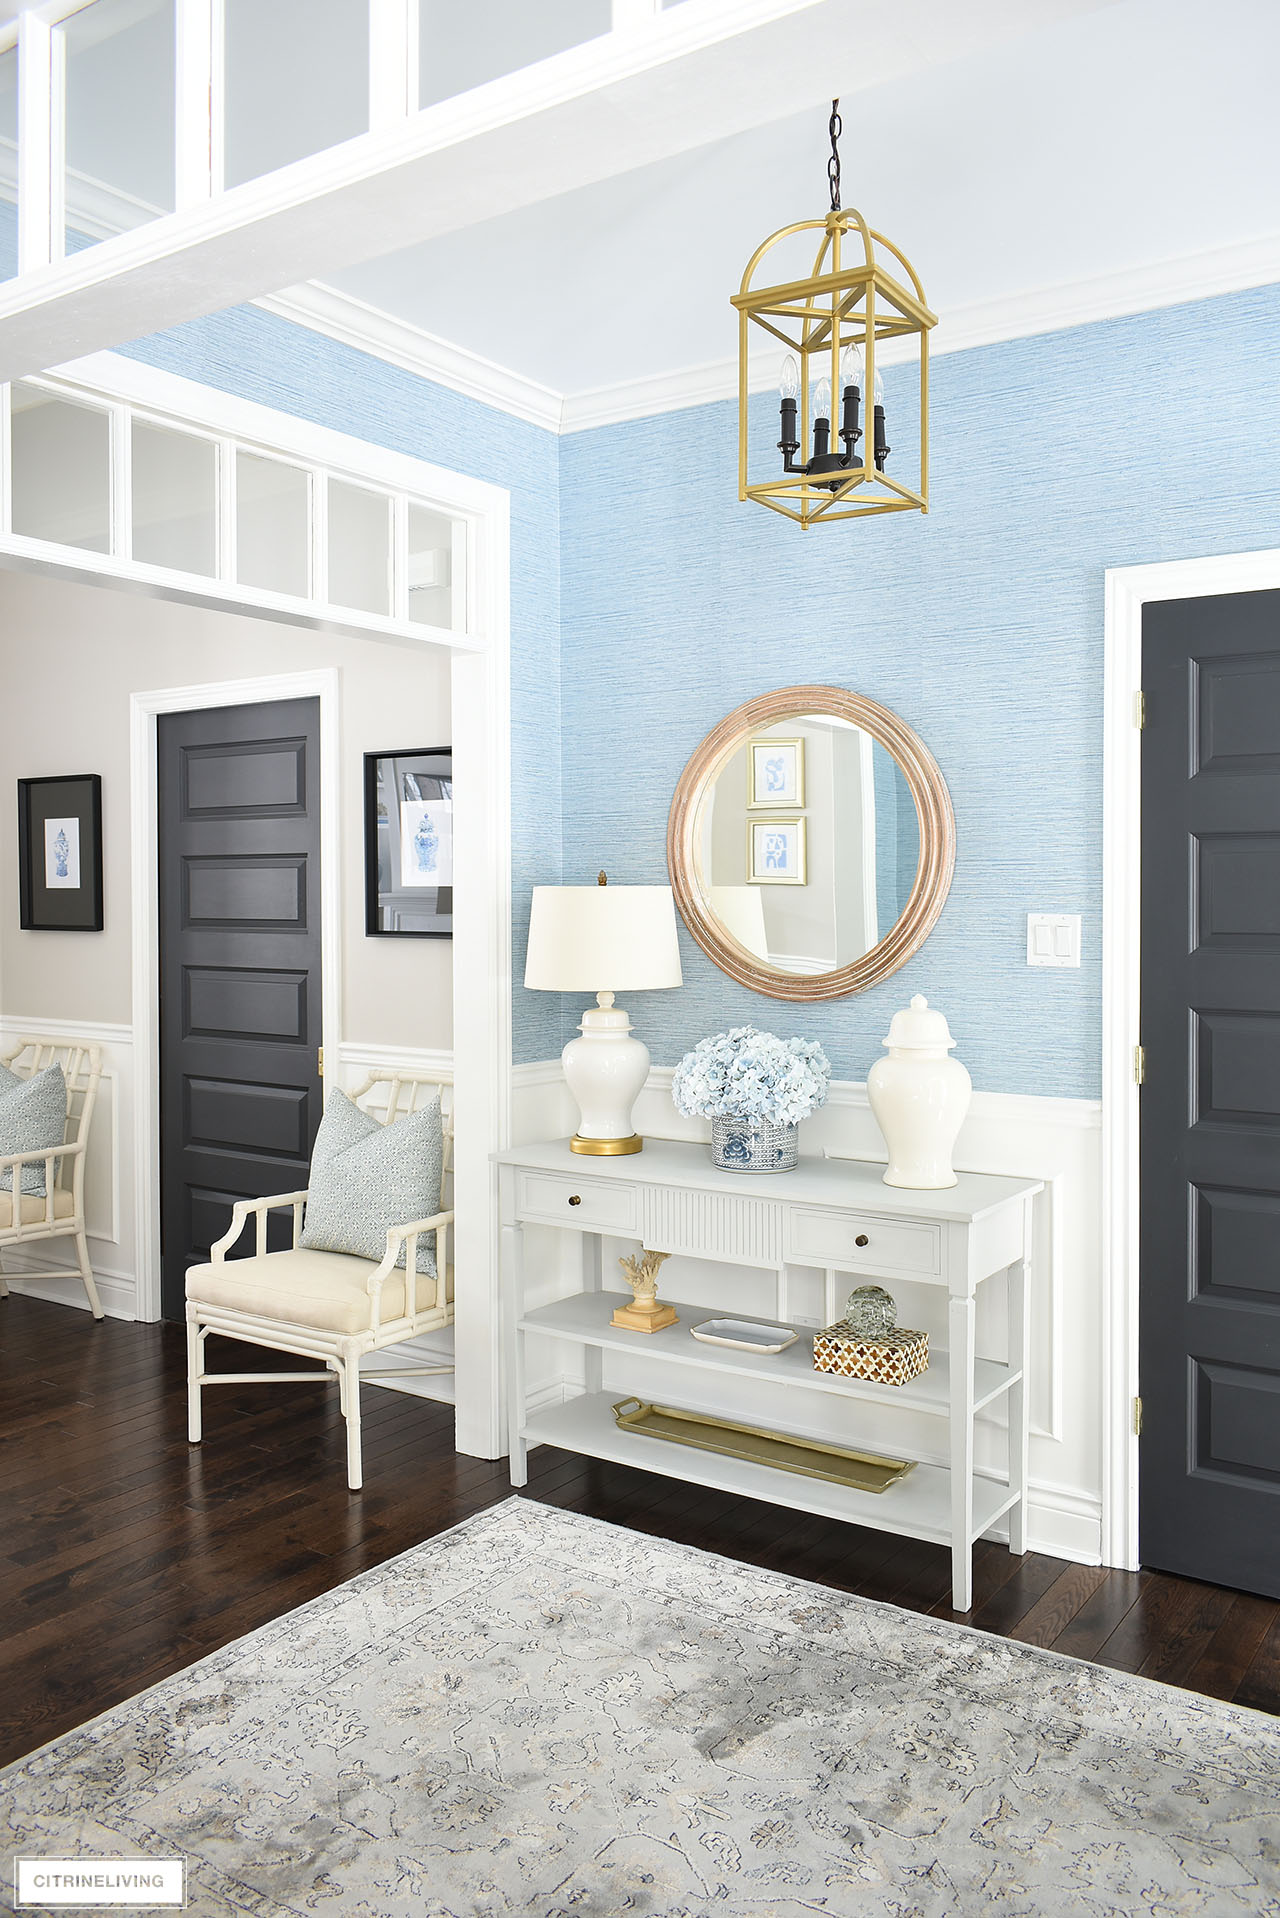 Gorgeous entryway decorated for spring with a soft and elegant light blue and white color palette.